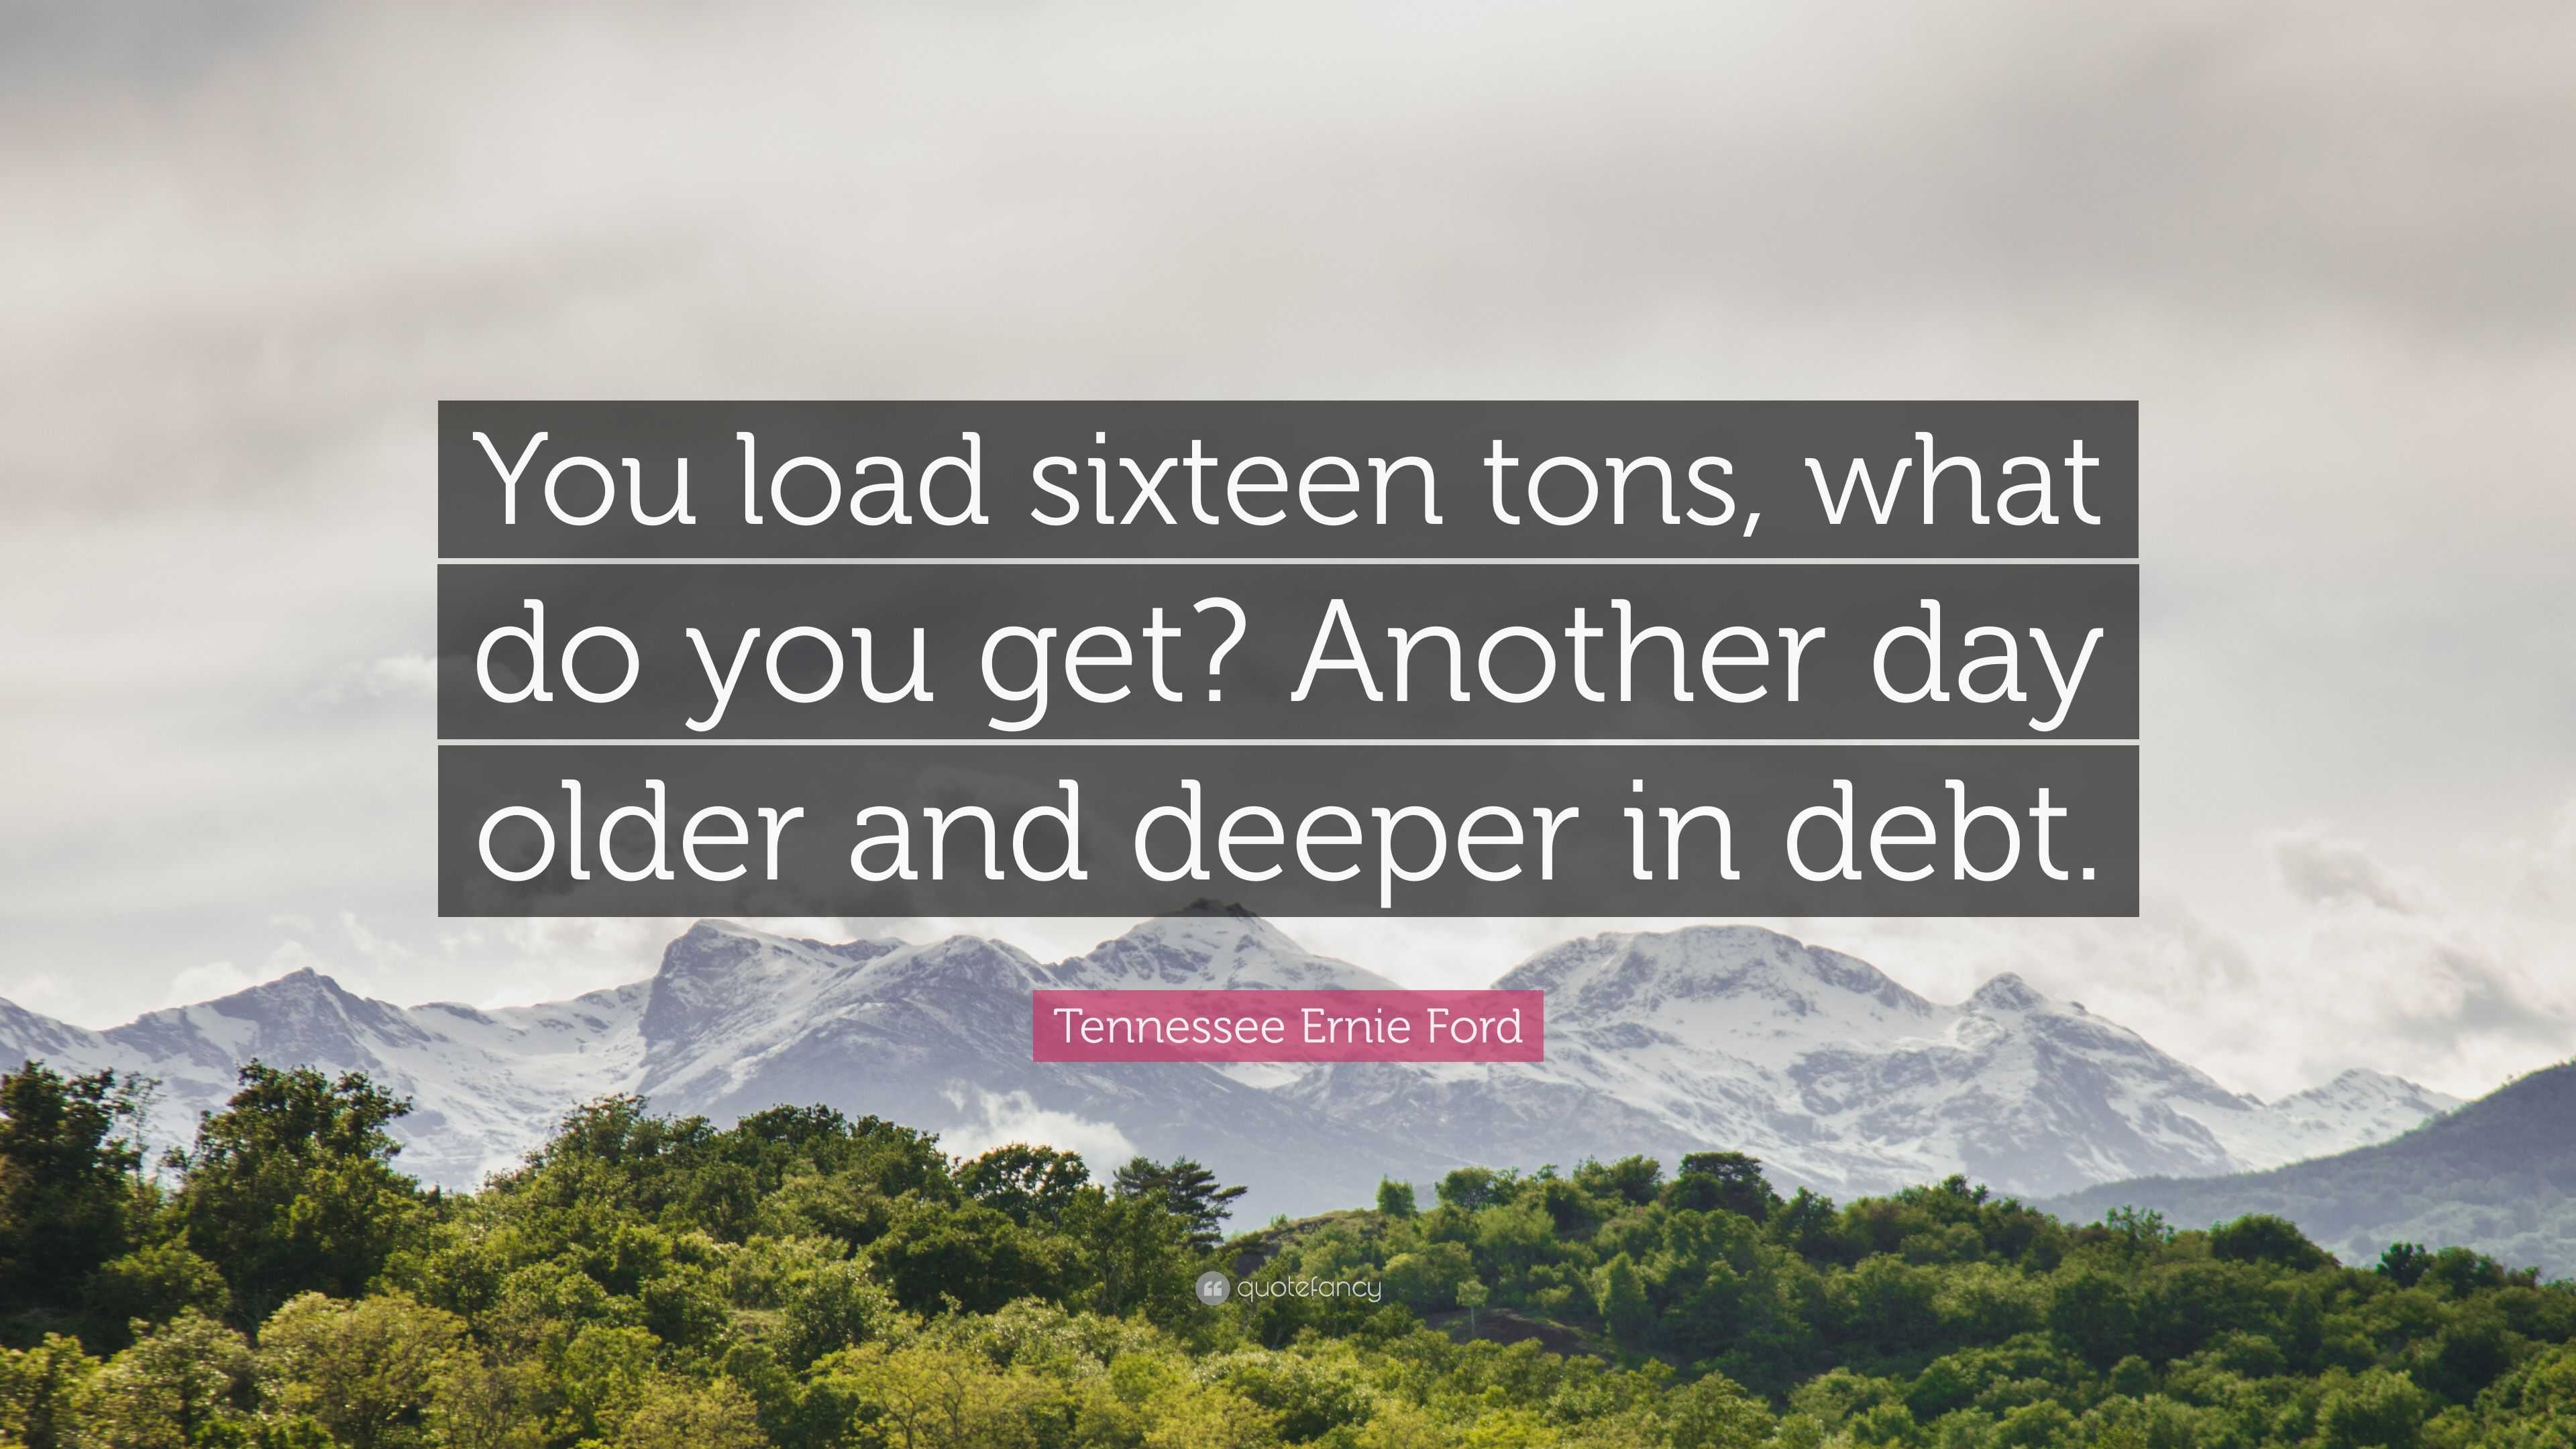 Tennessee Ernie Ford Quote: “You load sixteen tons, do you get? day older and